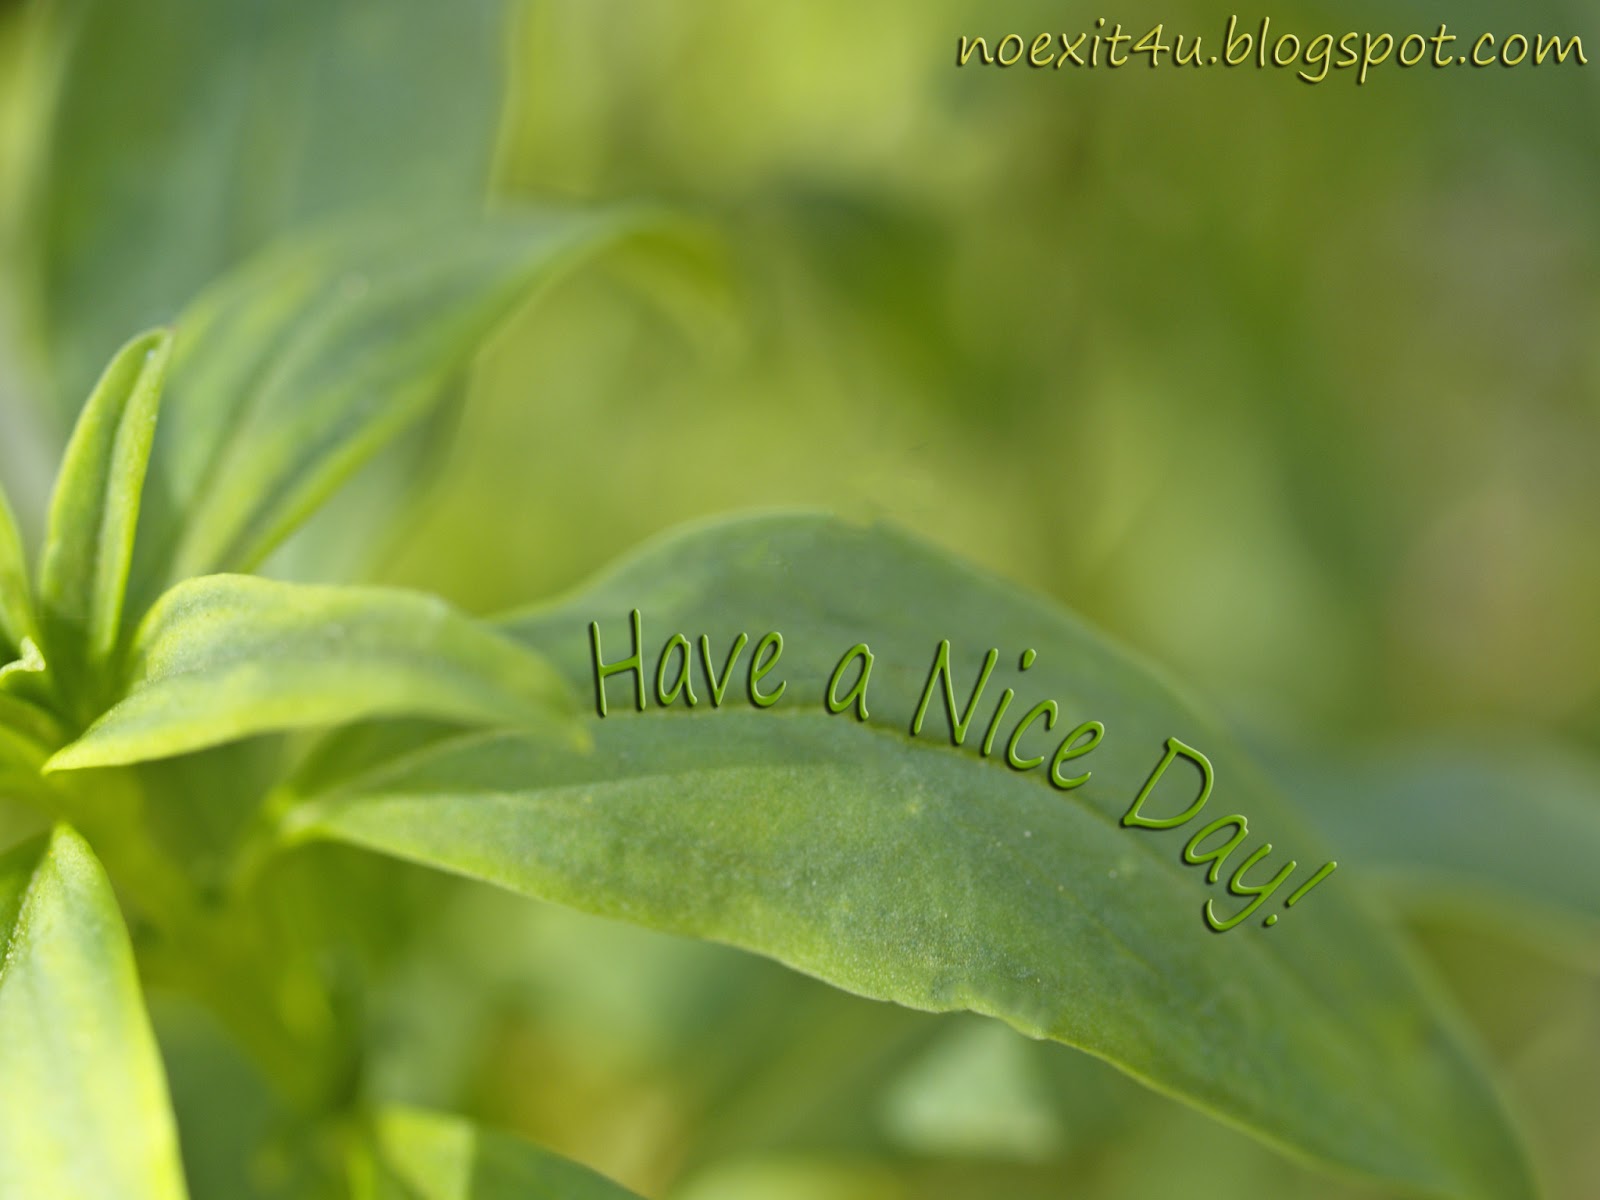 Have A Nice Day Wallpaper HD Noexit4u